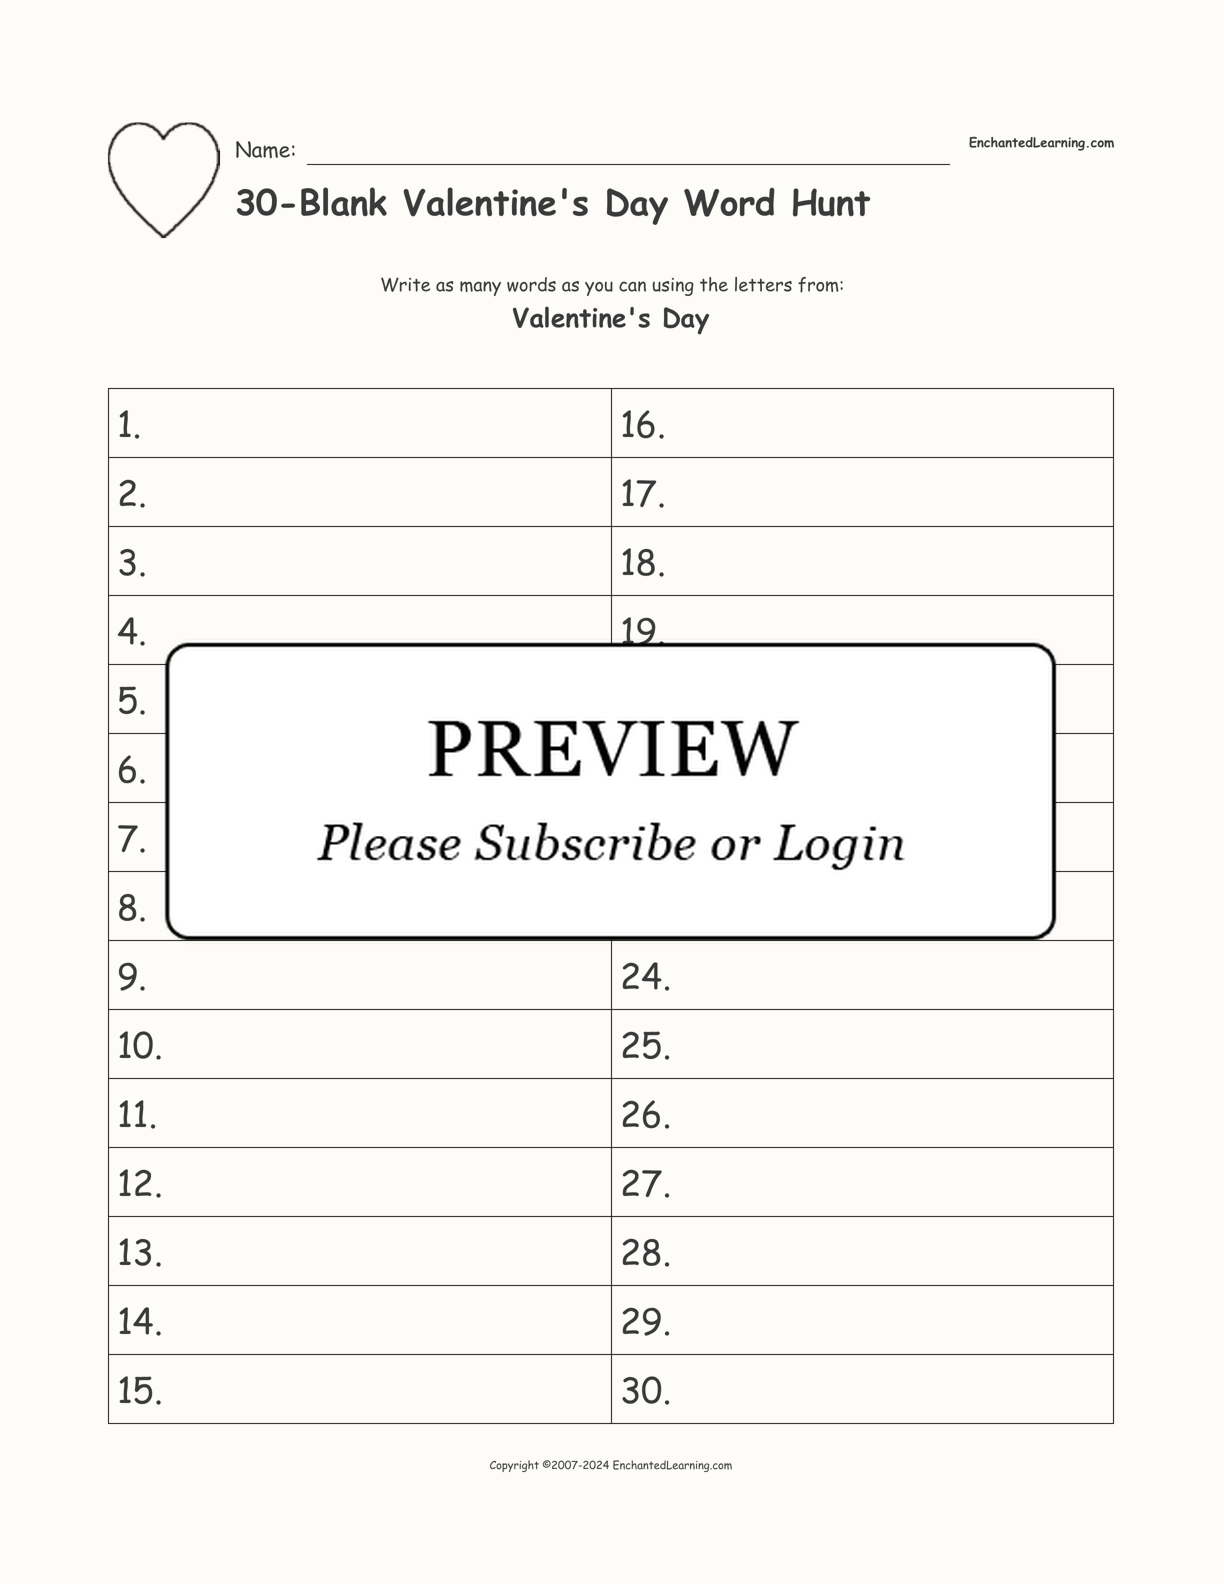 30-Blank Valentine's Day Word Hunt interactive worksheet page 1